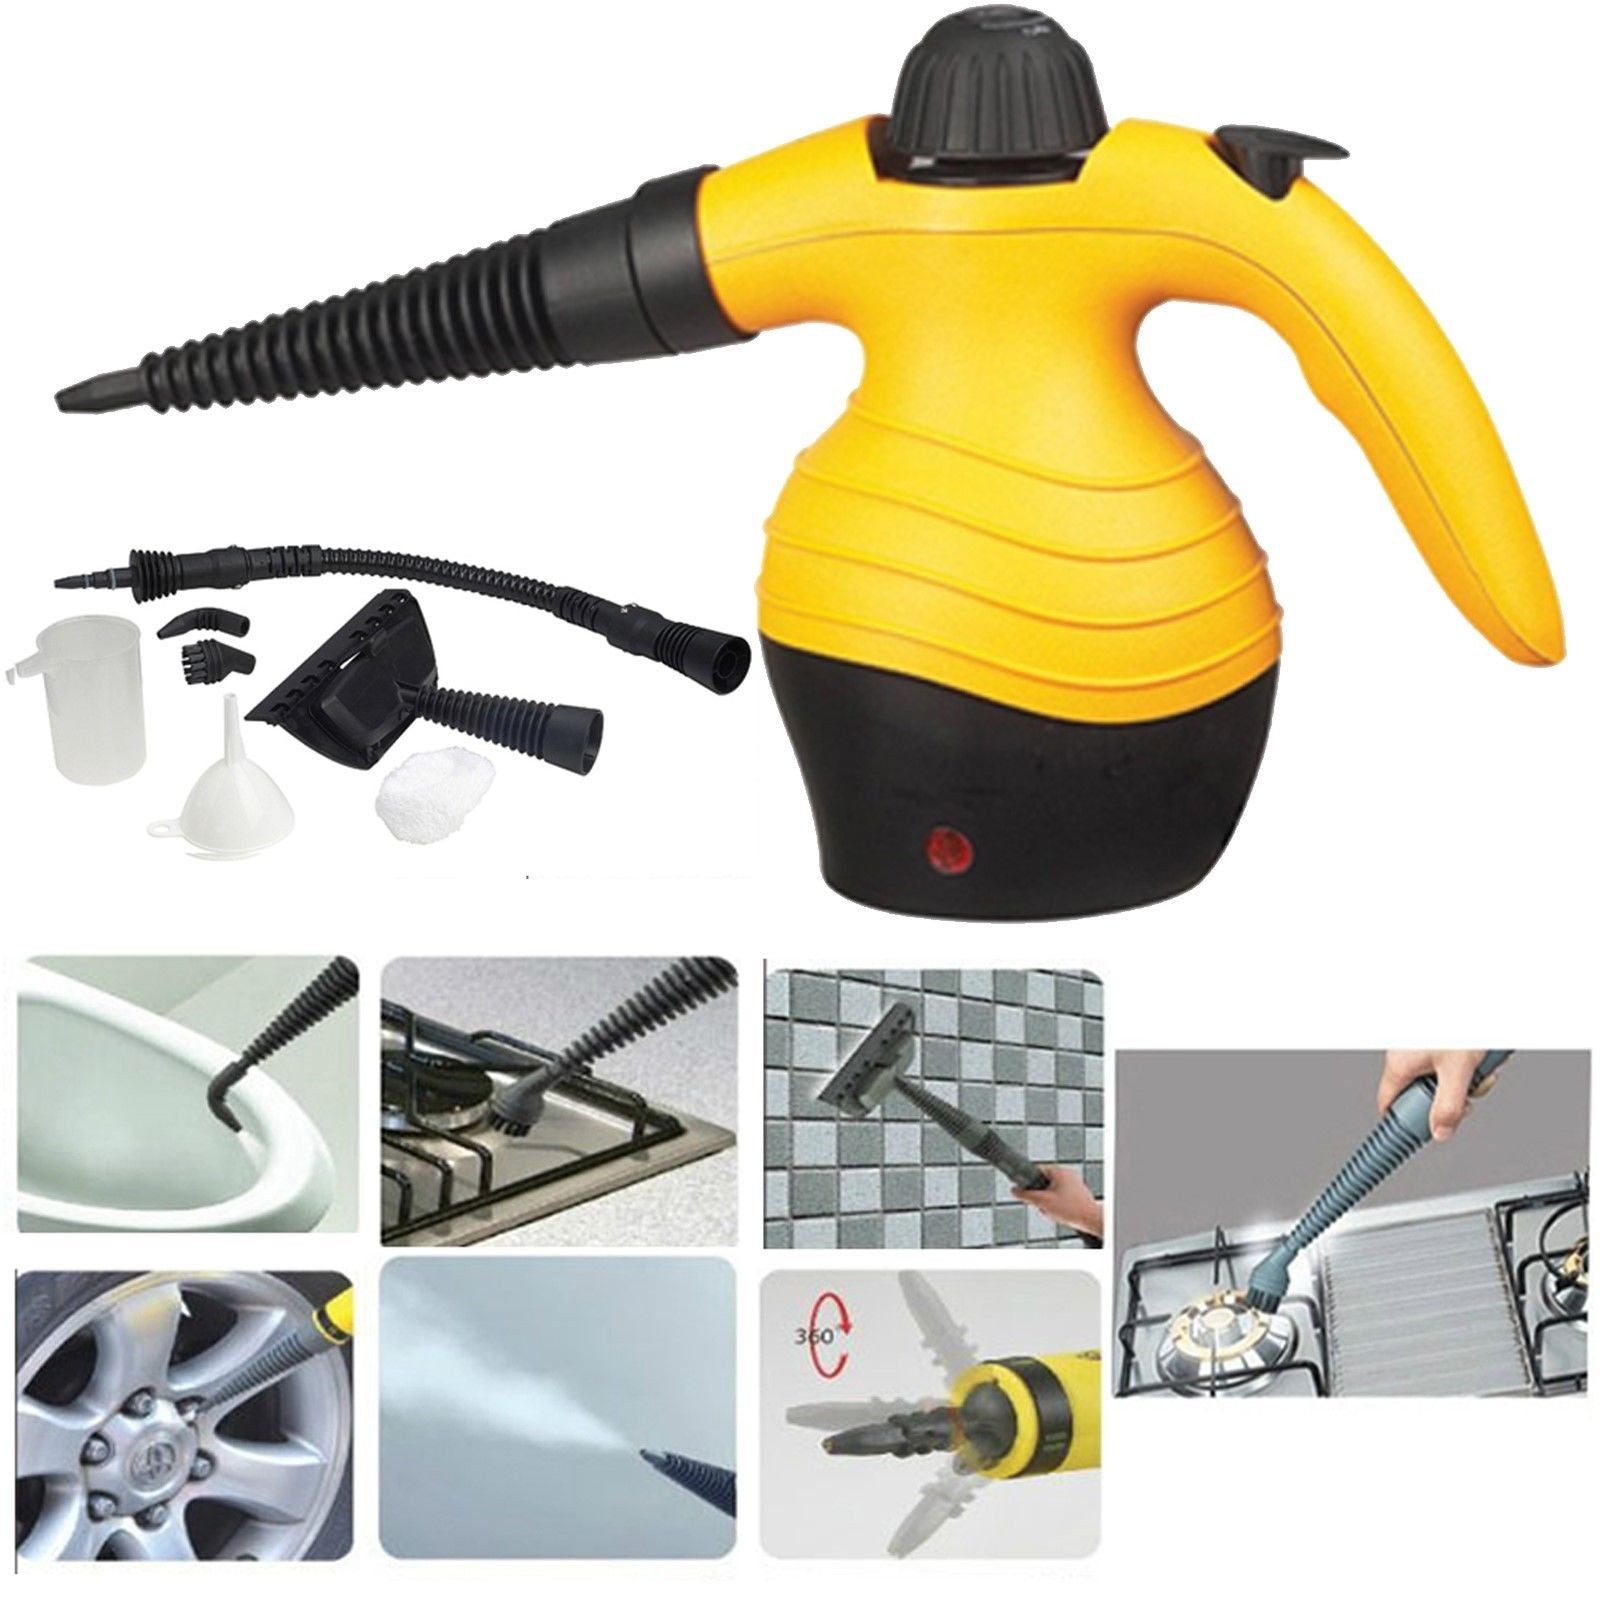 Electric Portable Hand Held Steam Steamer Cleaner with Accessories